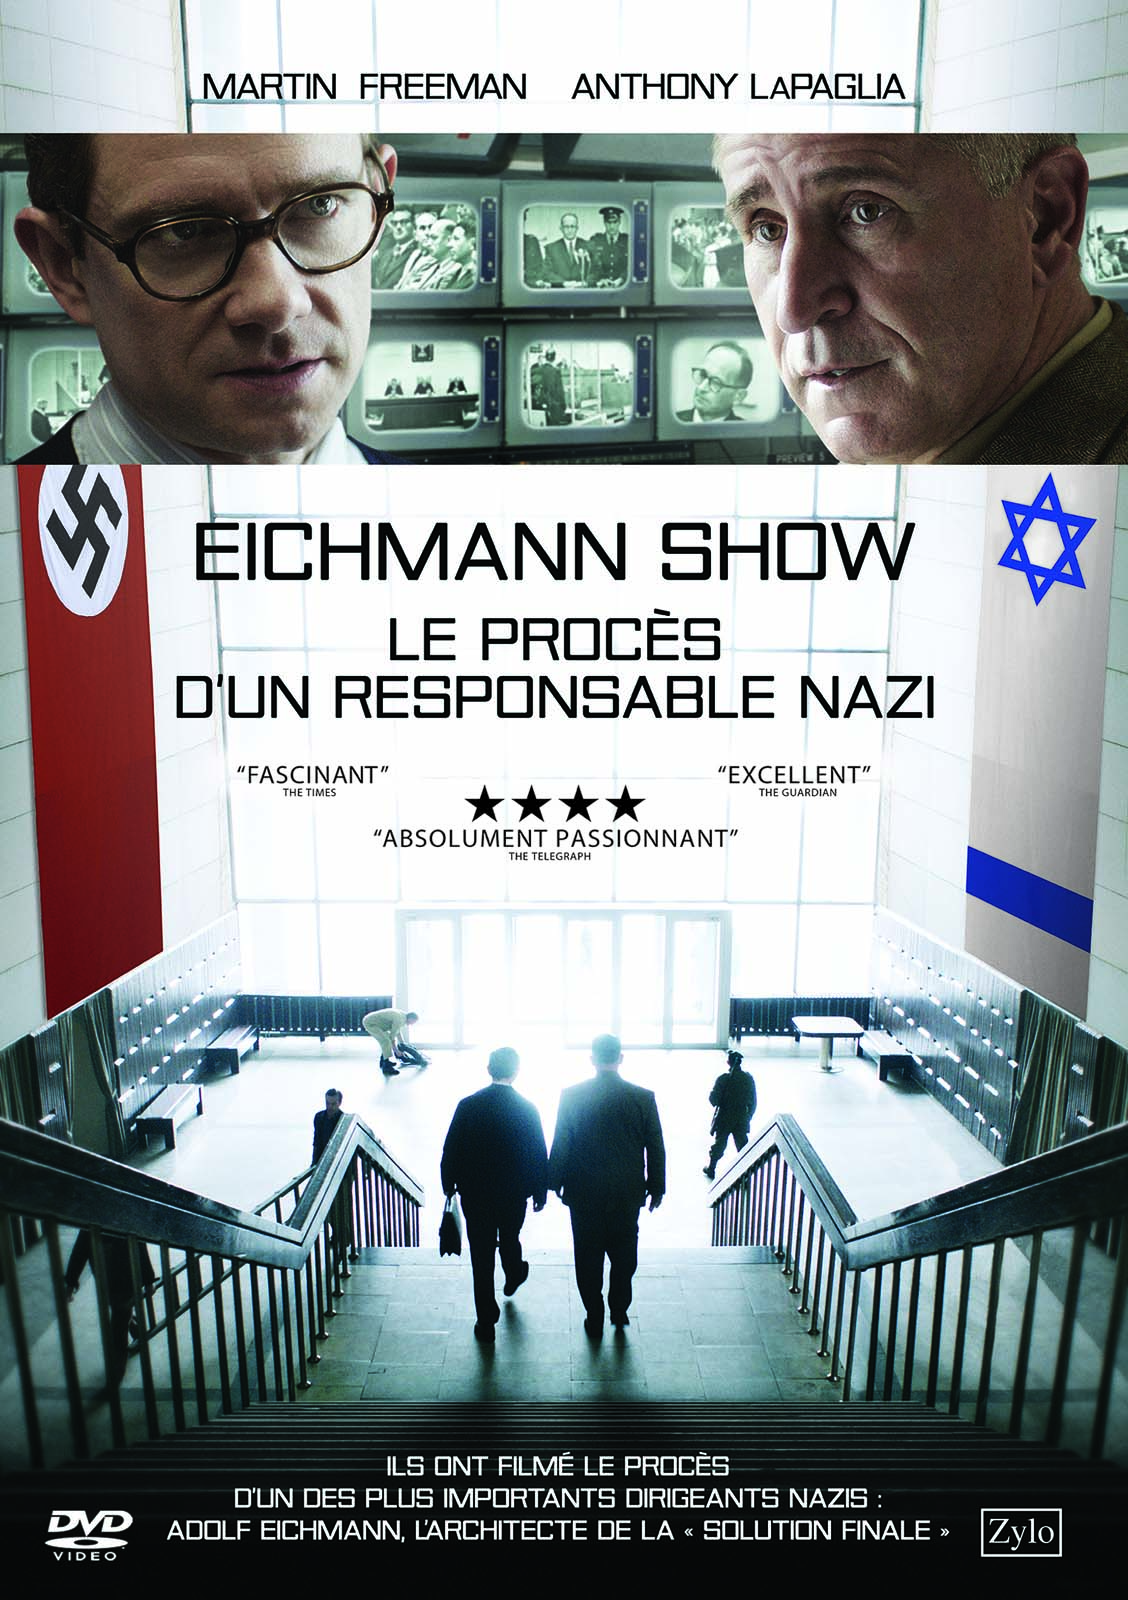 The Eichmann Show Pics, Movie Collection